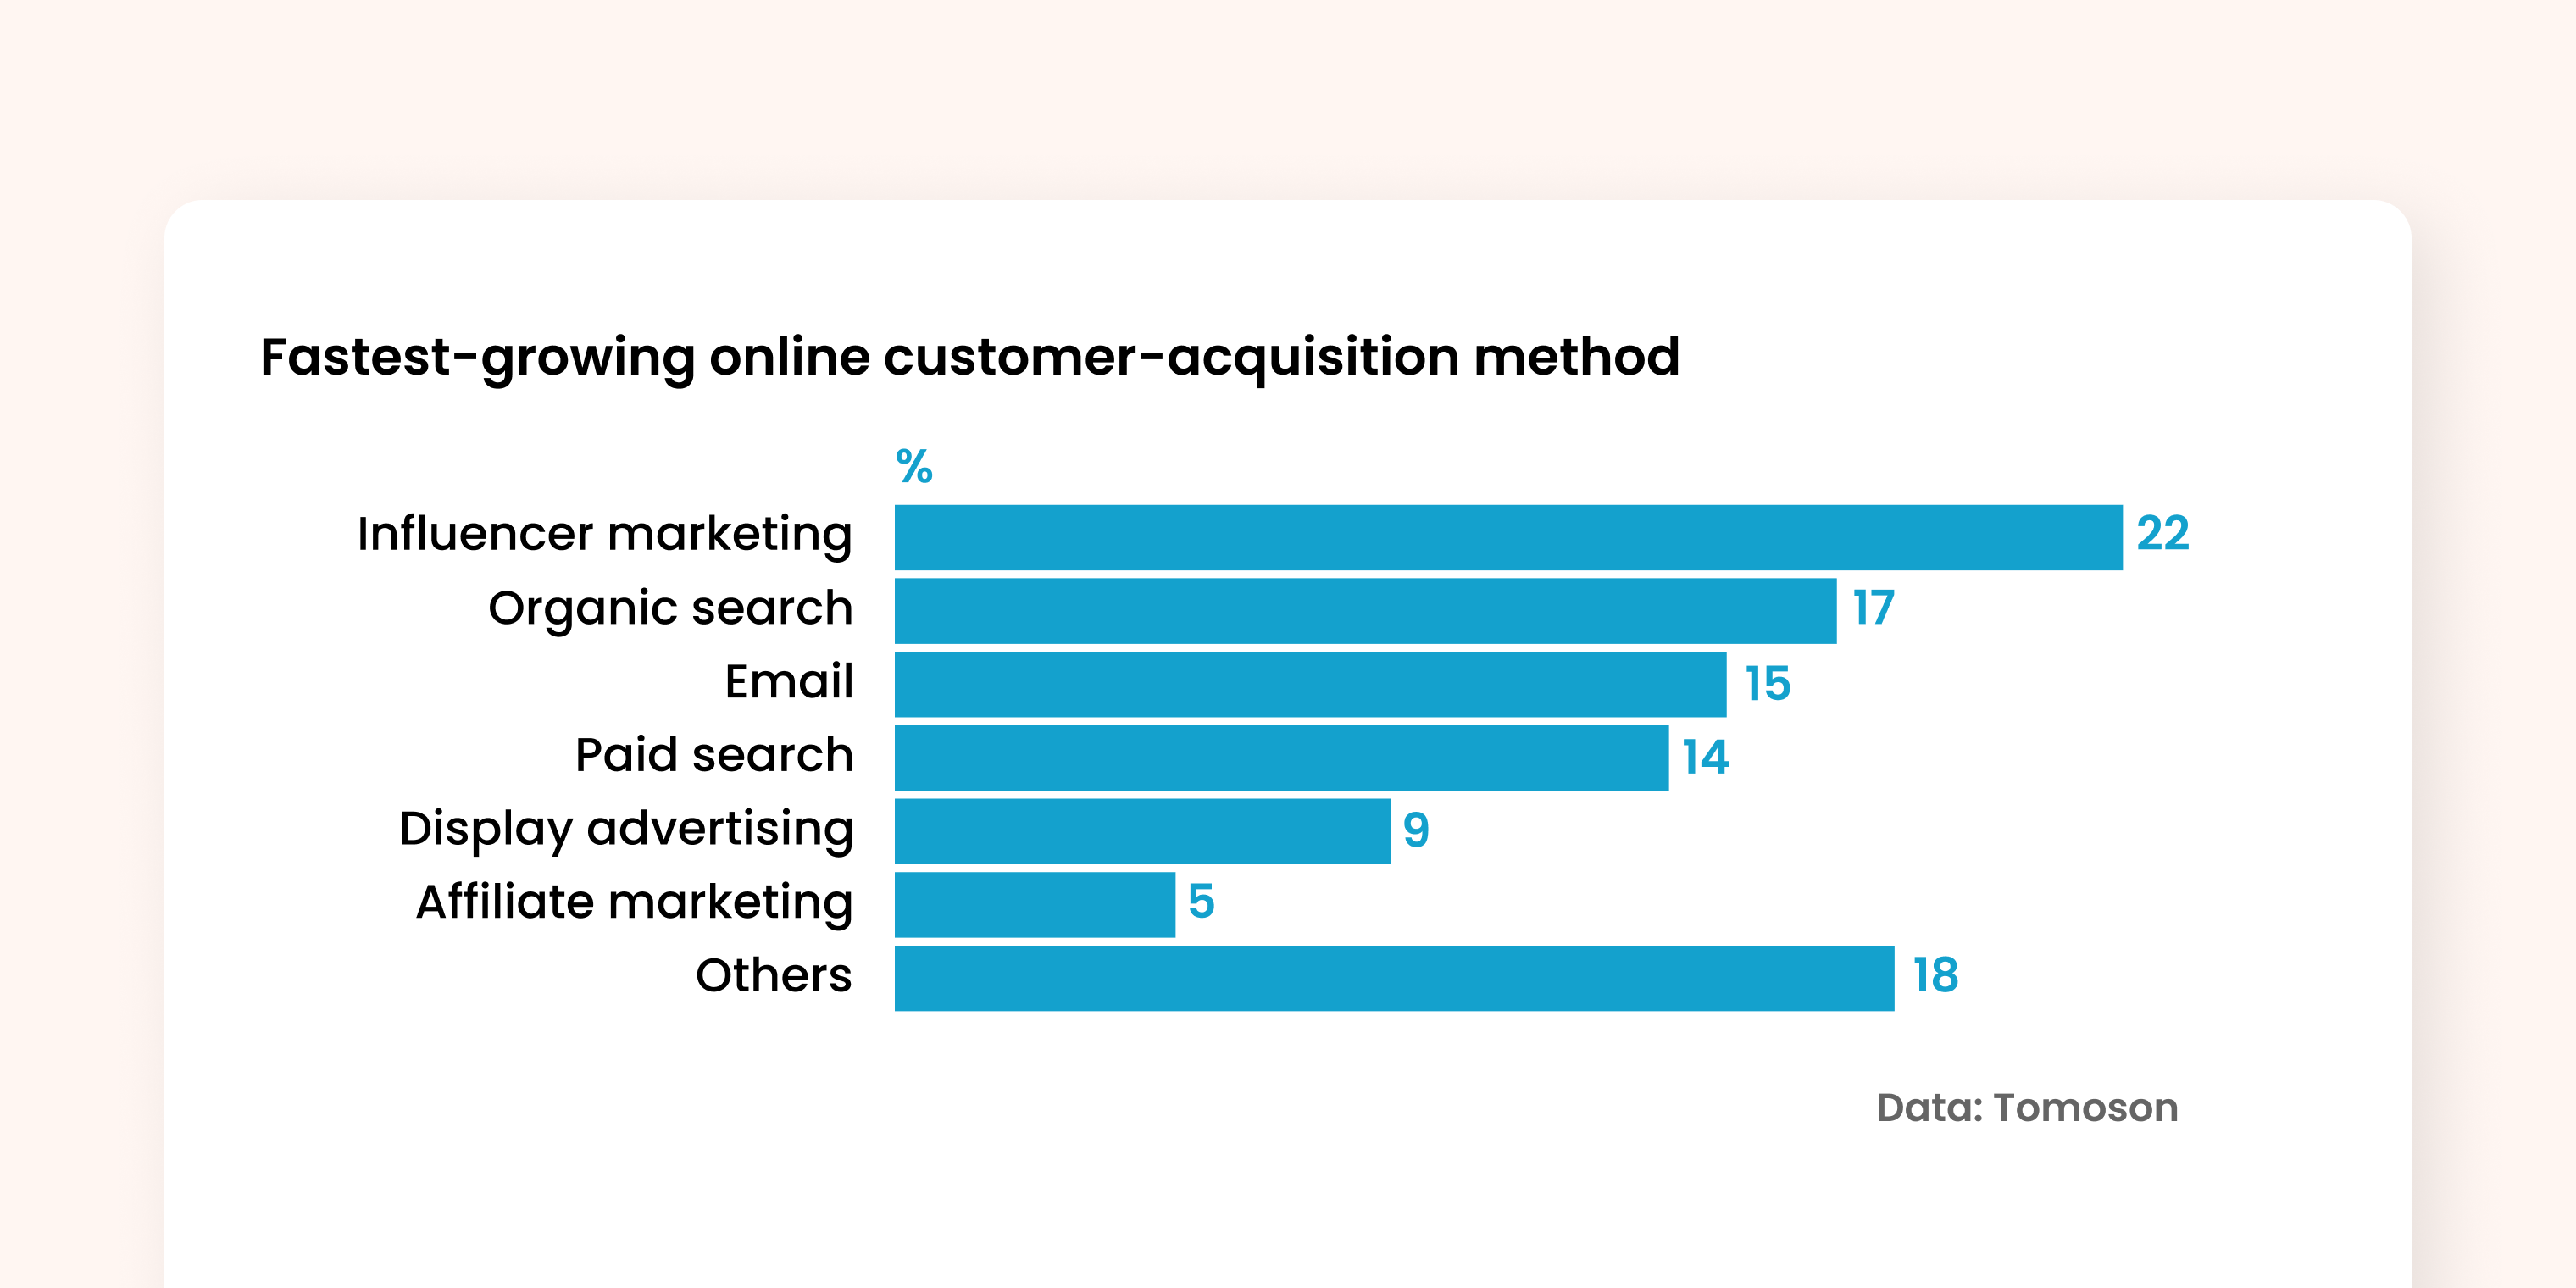 Fastest-growing online customer-acquisition method